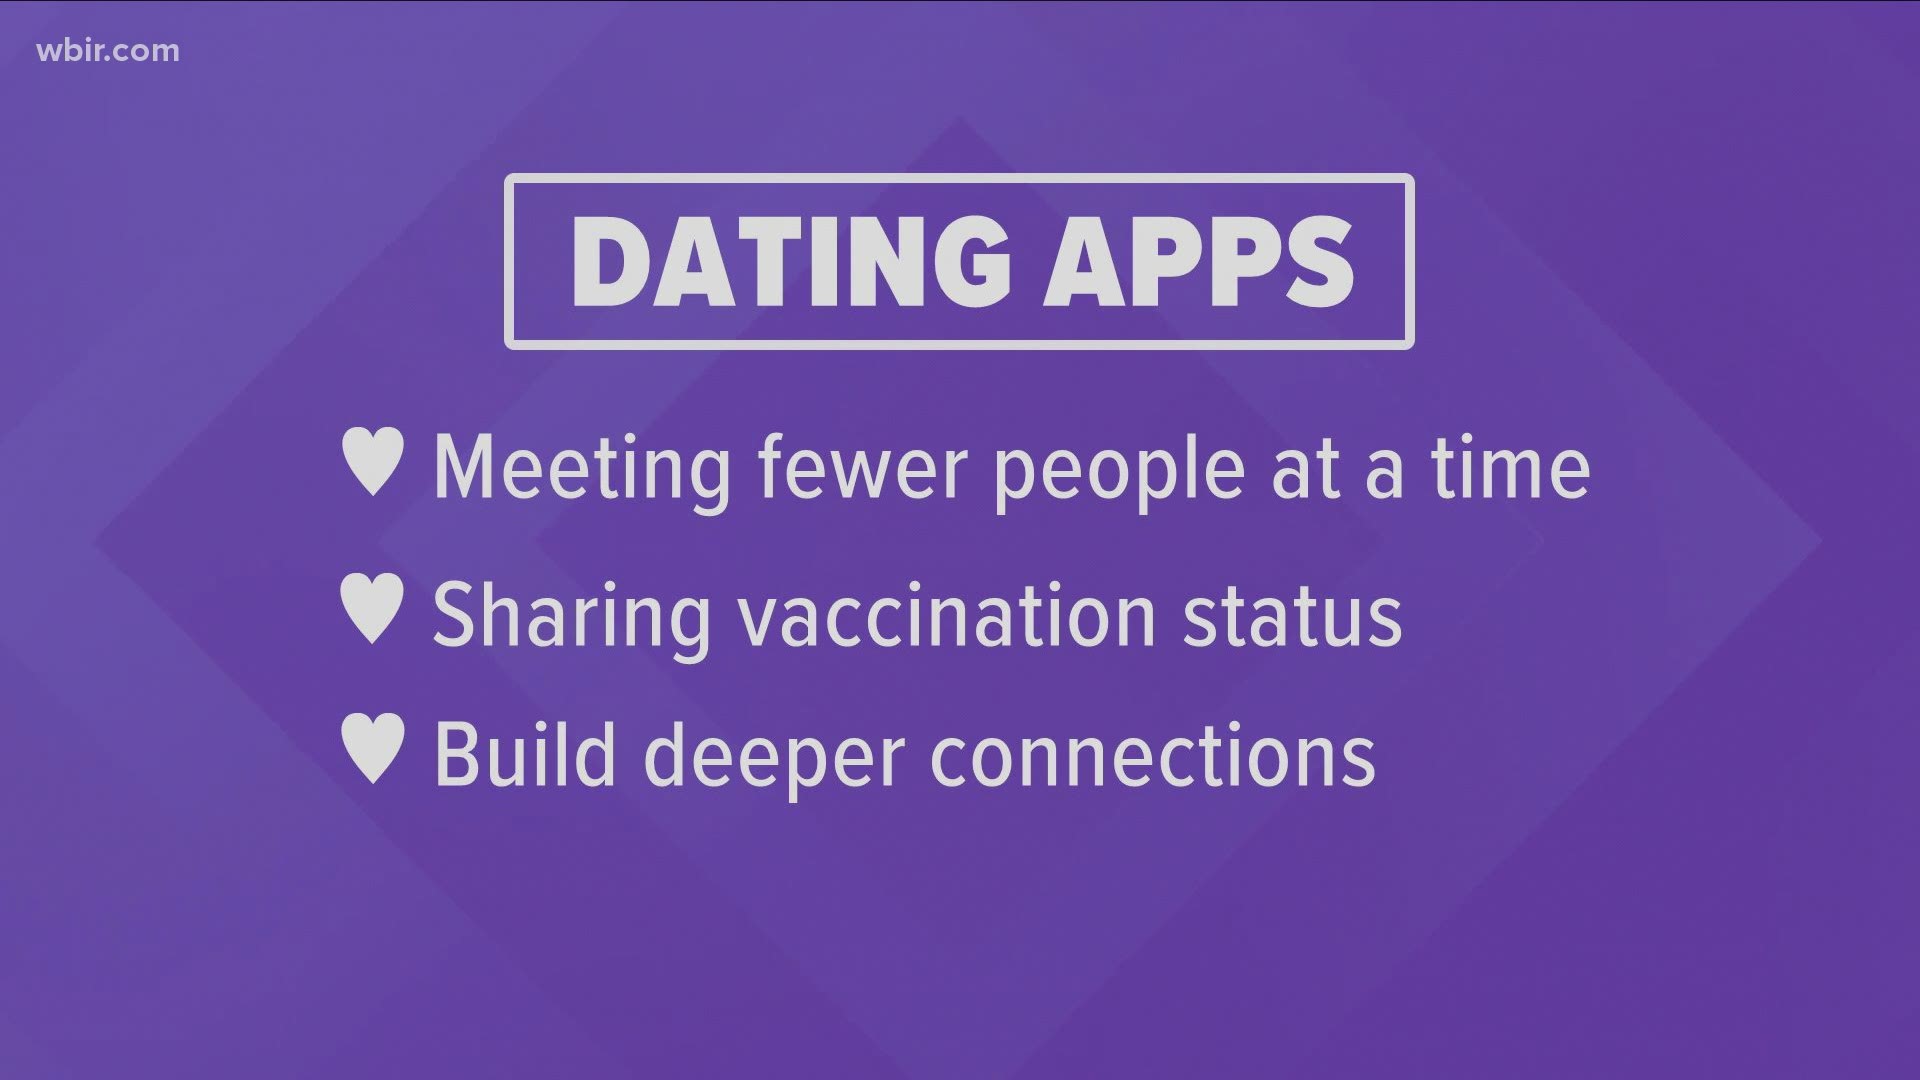 As we return to our pre-pandemic lifestyles, we're seeing changes to the dating scene.